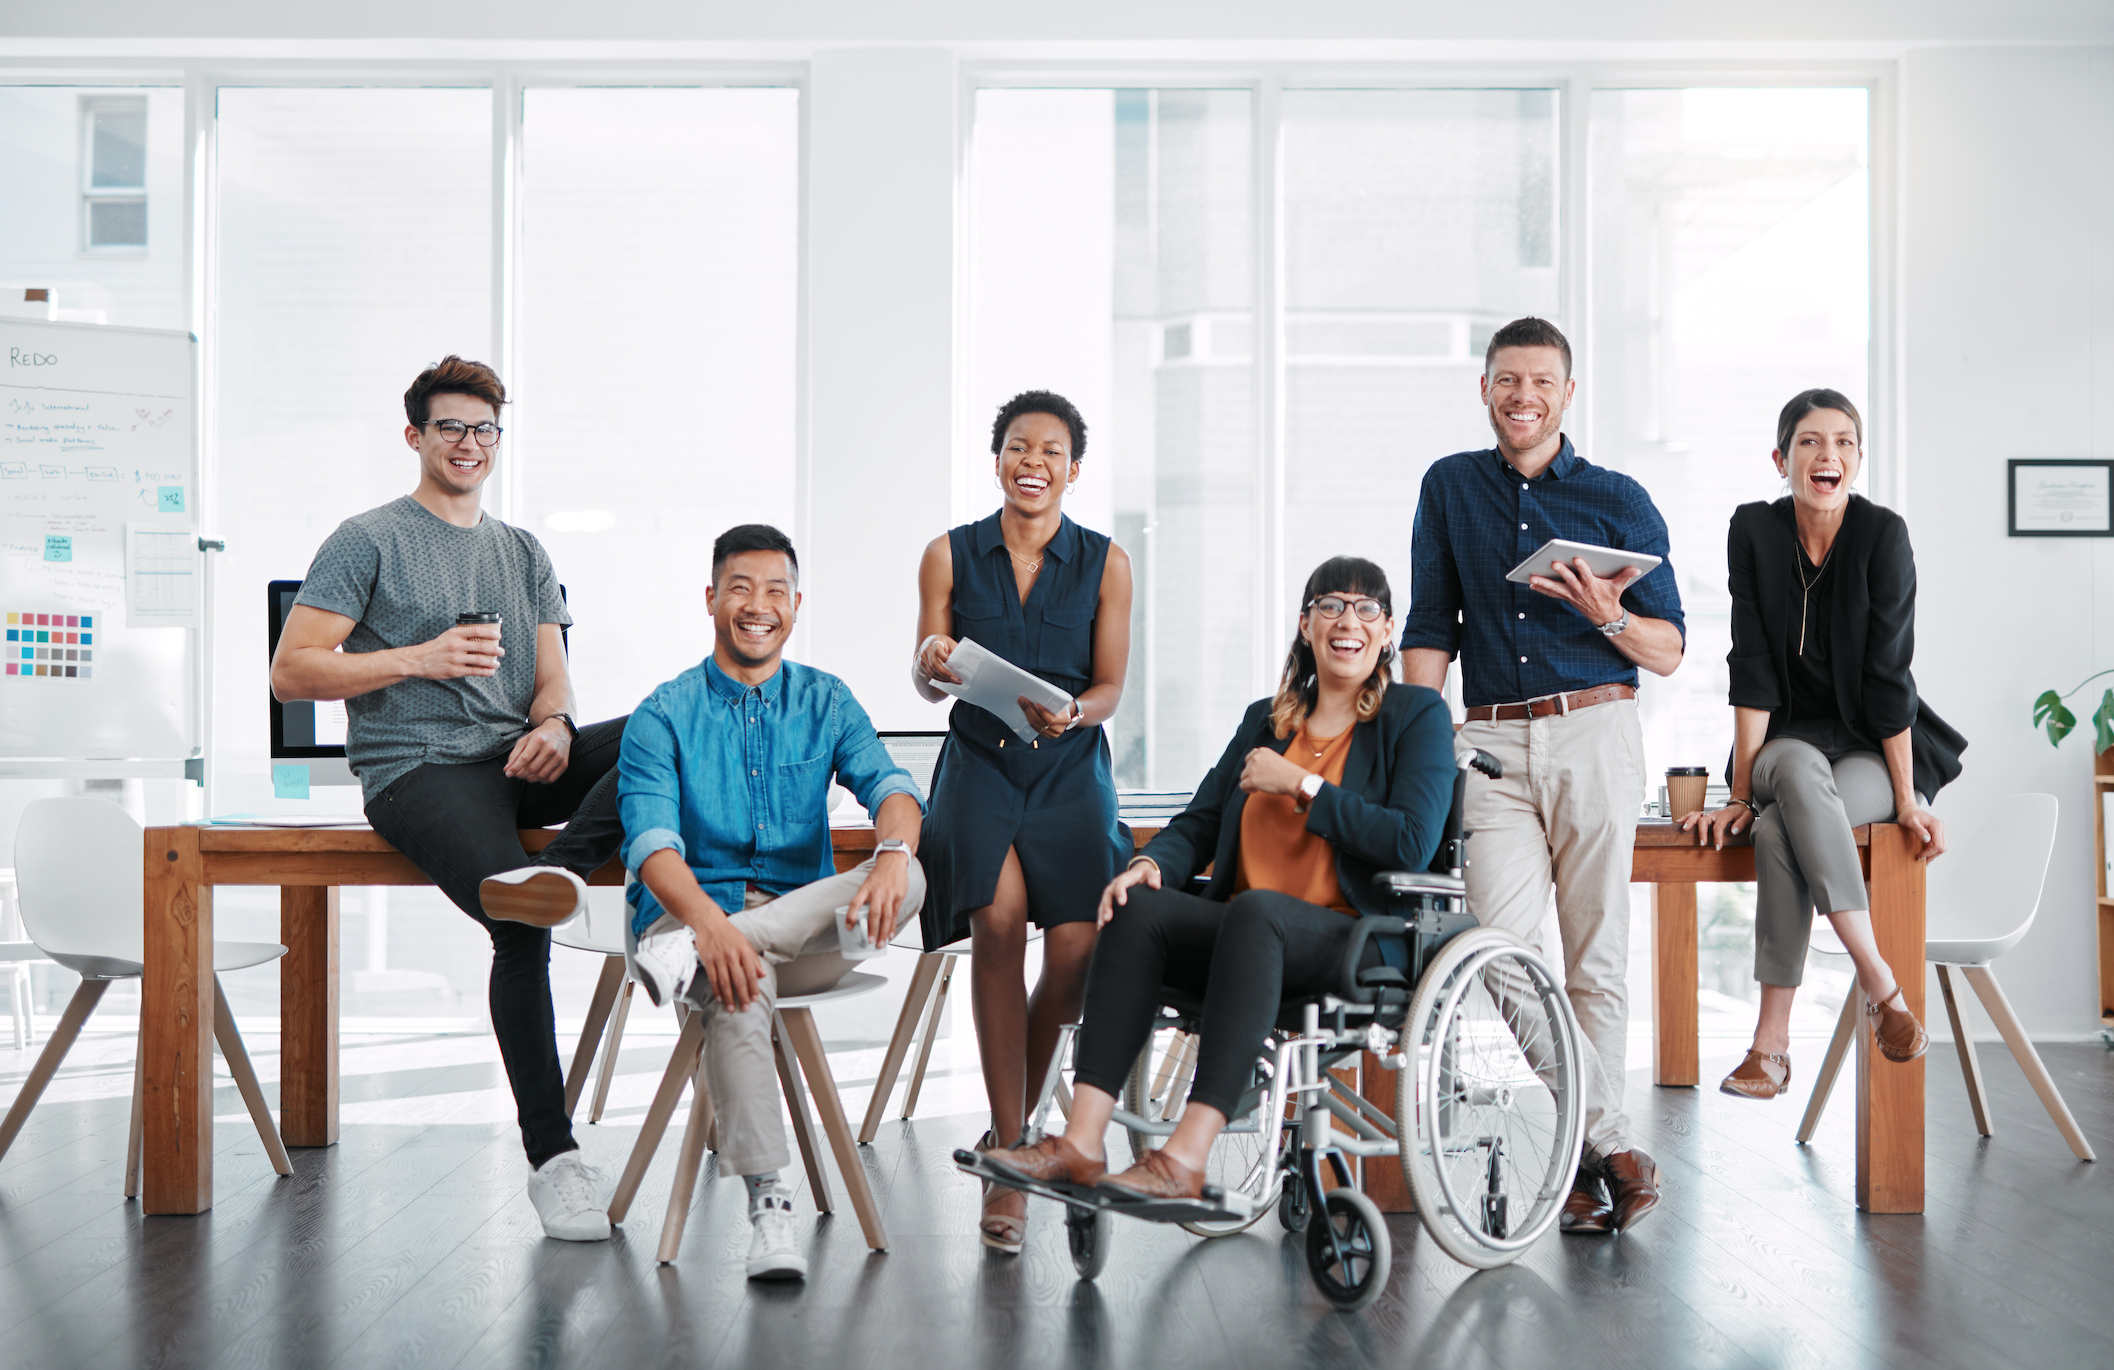 Group of coworkers with and without disabilities smiling together